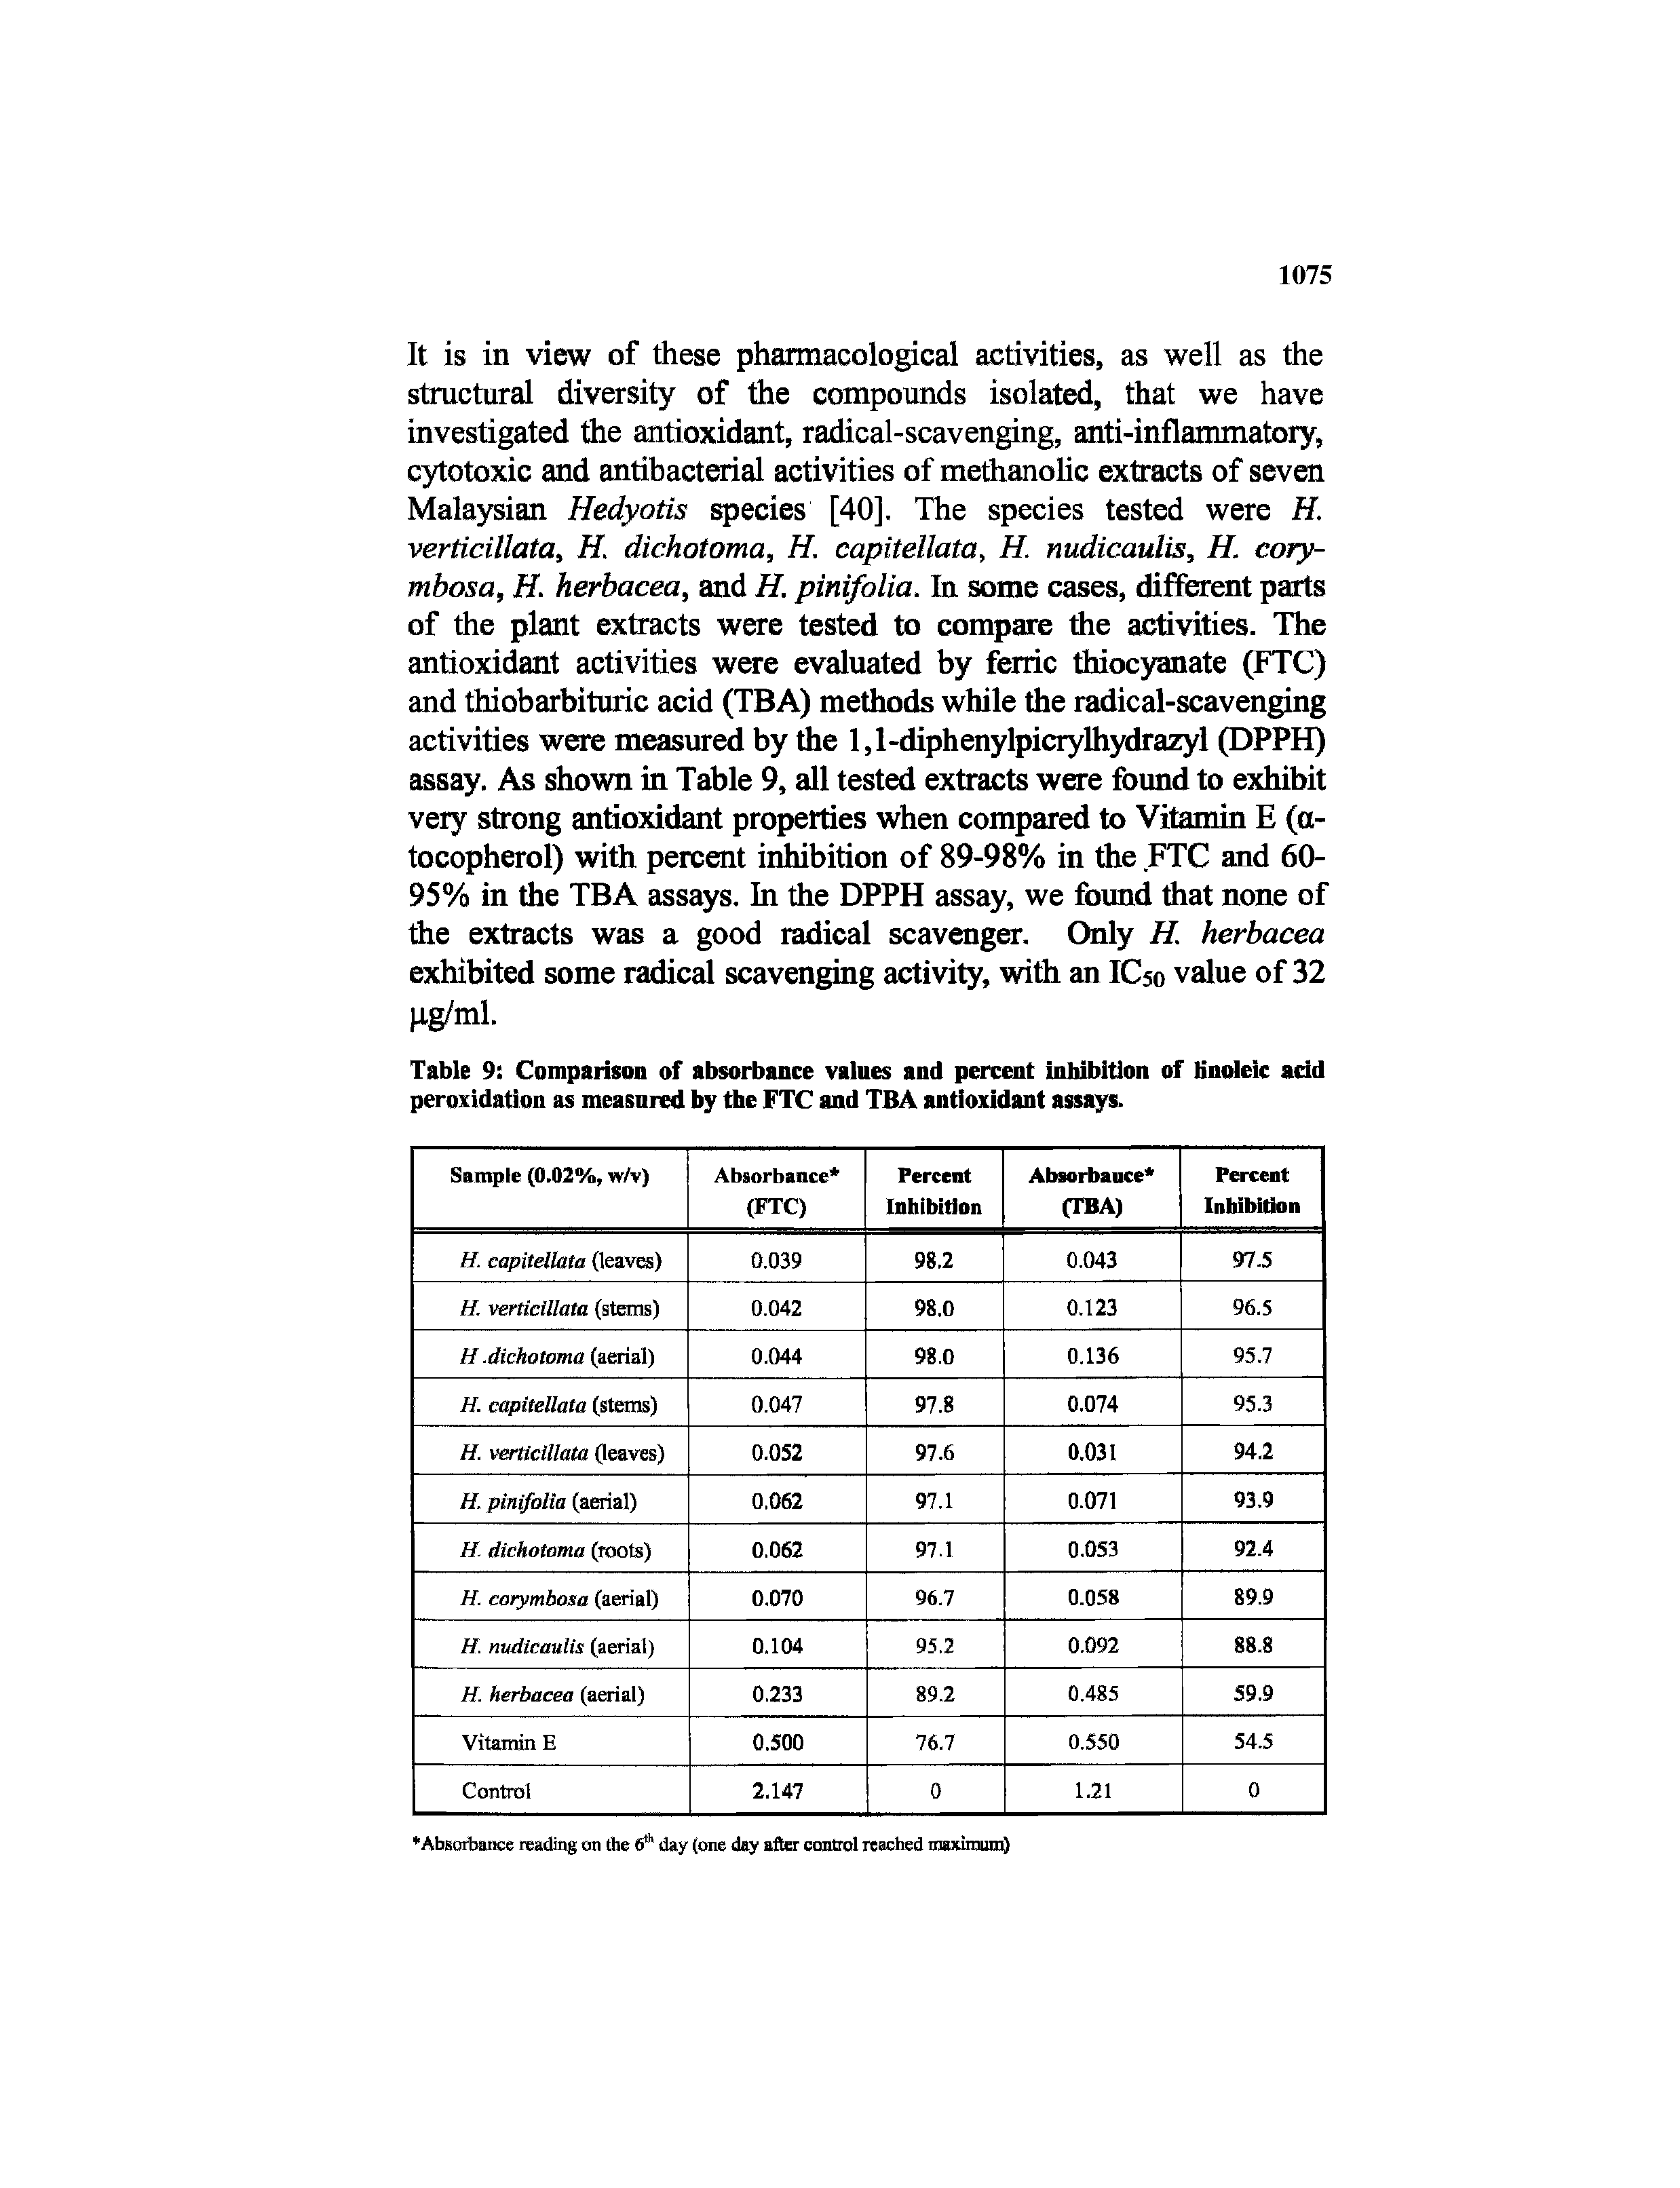 Table 9 Comparison of absorbance values and percent inhibition of Knoleic add peroxidation as measured by the FTC and TBA antioxidant assays.